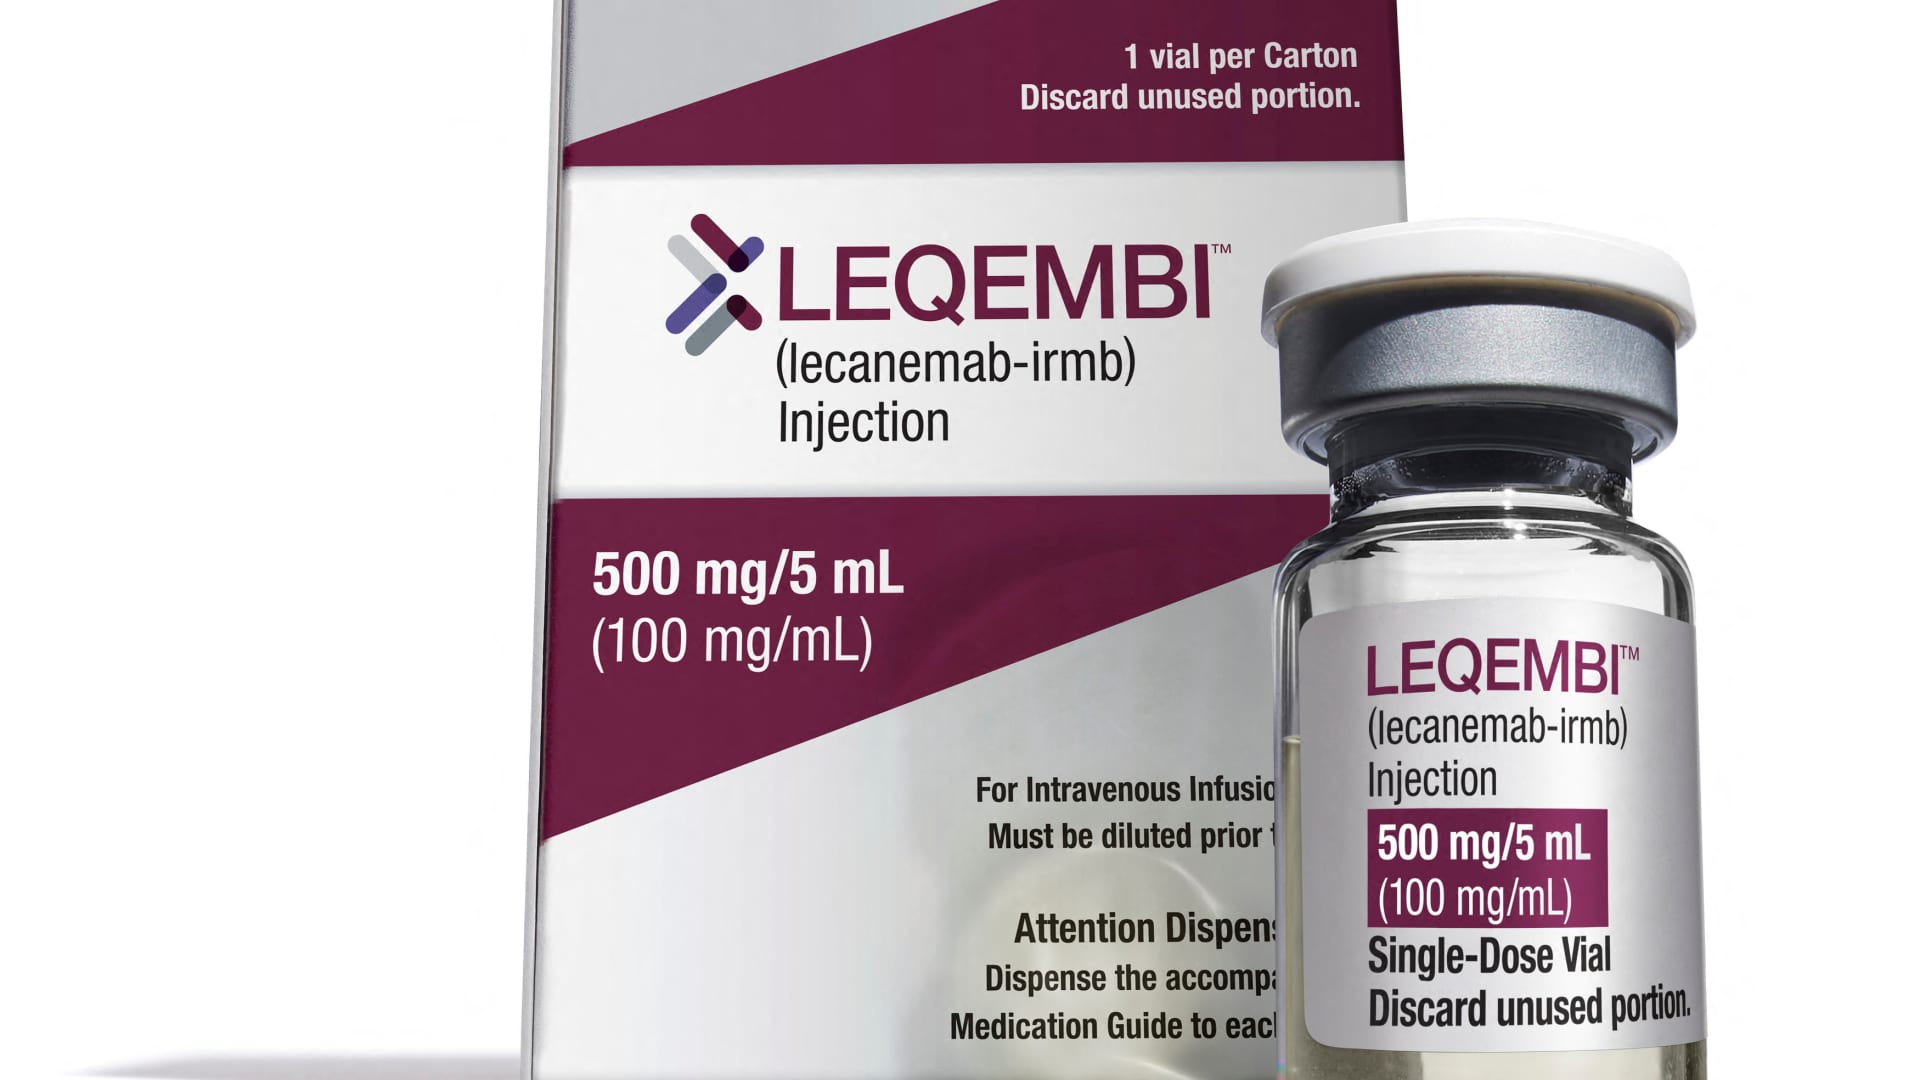 Healthy Returns: The launch of breakthrough Alzheimer’s drug Leqembi is off to a slow start